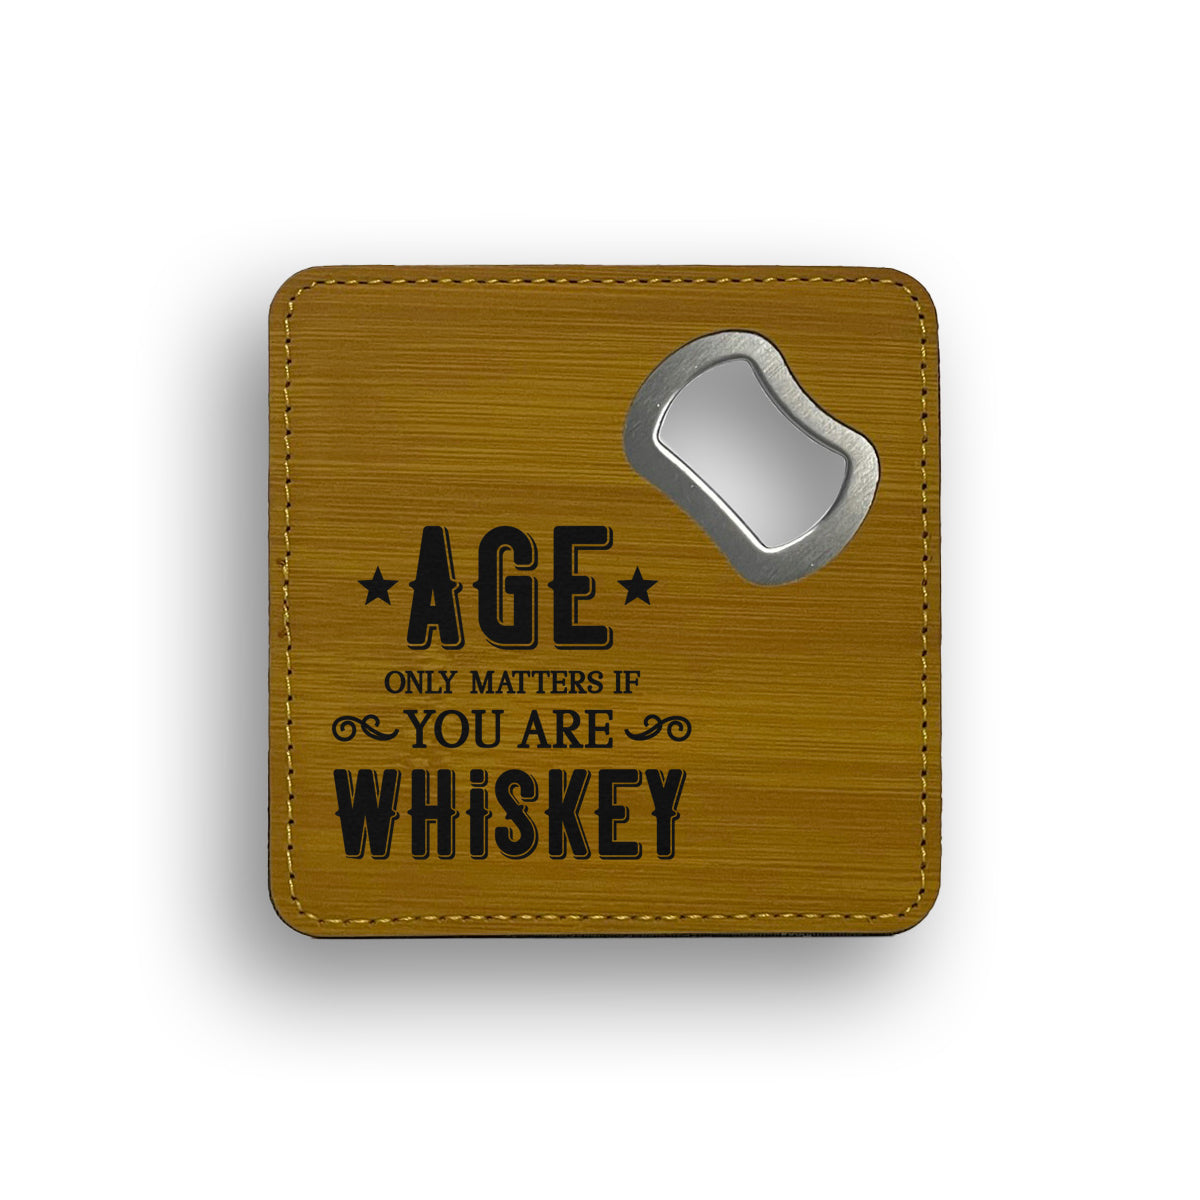 Age Matters Only If You're Whiskey Bottle Opener Coaster